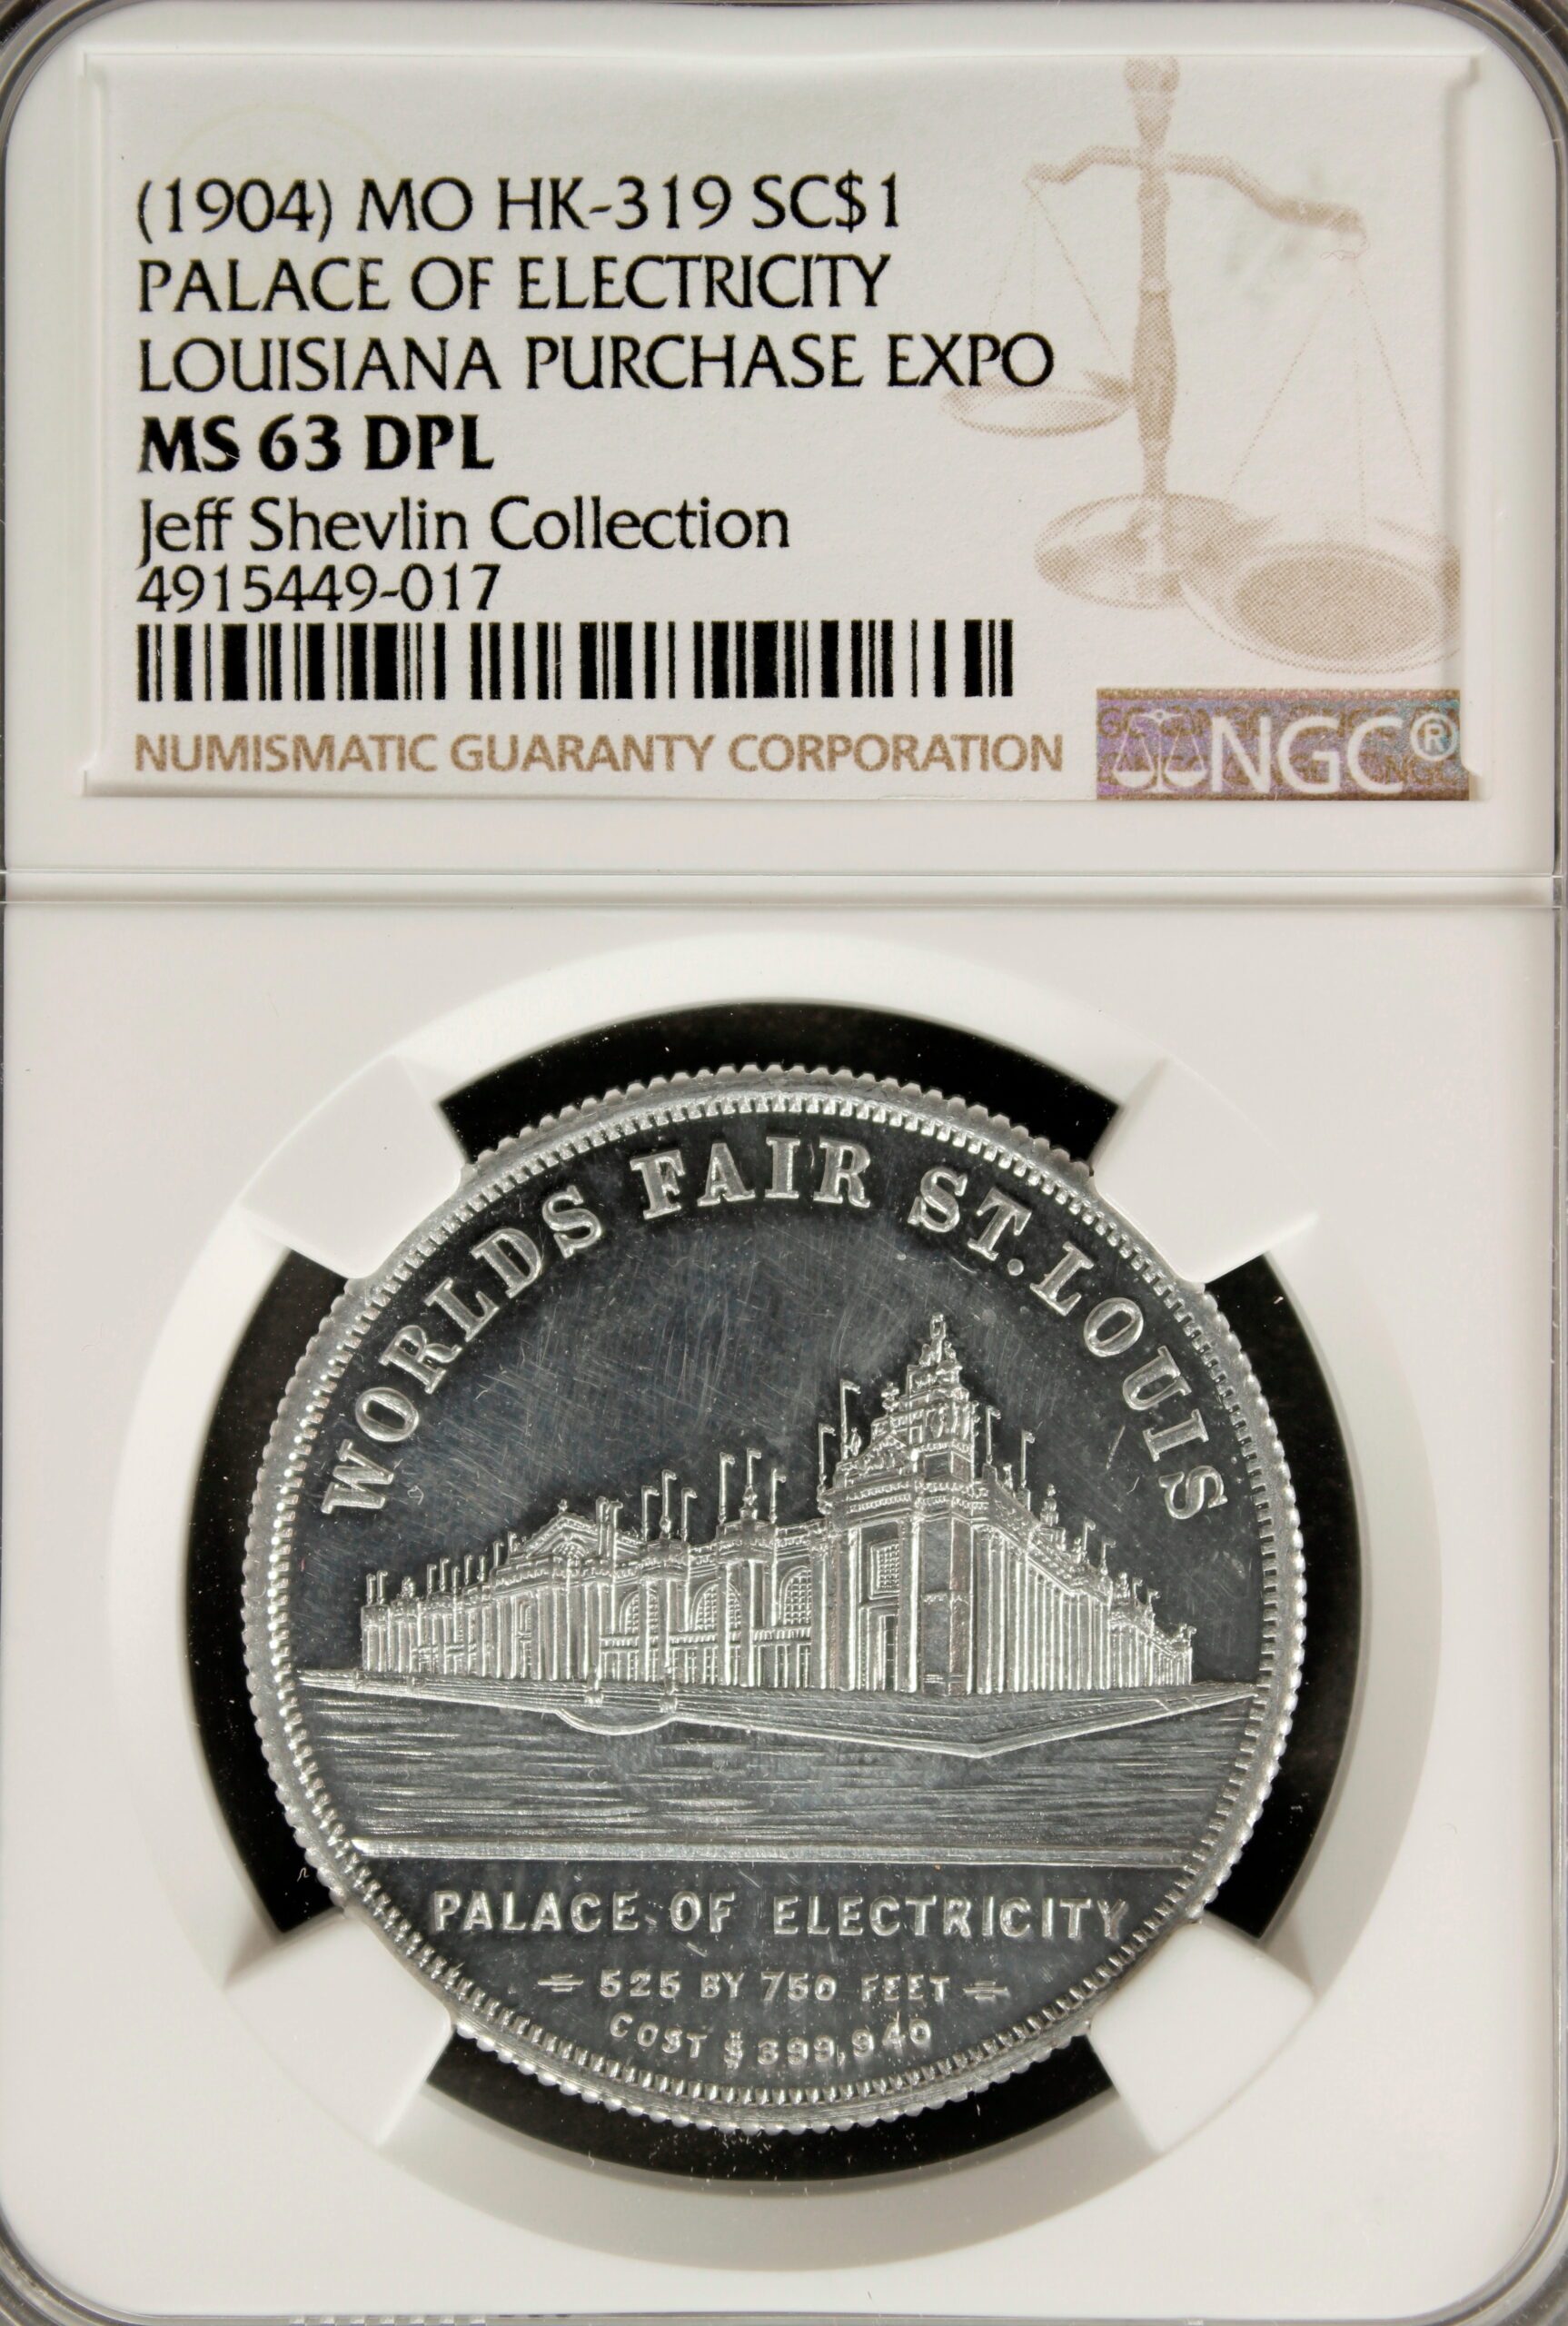 HK-319 Louisiana Purchase Schwaab Electricity / Fraternity SCD